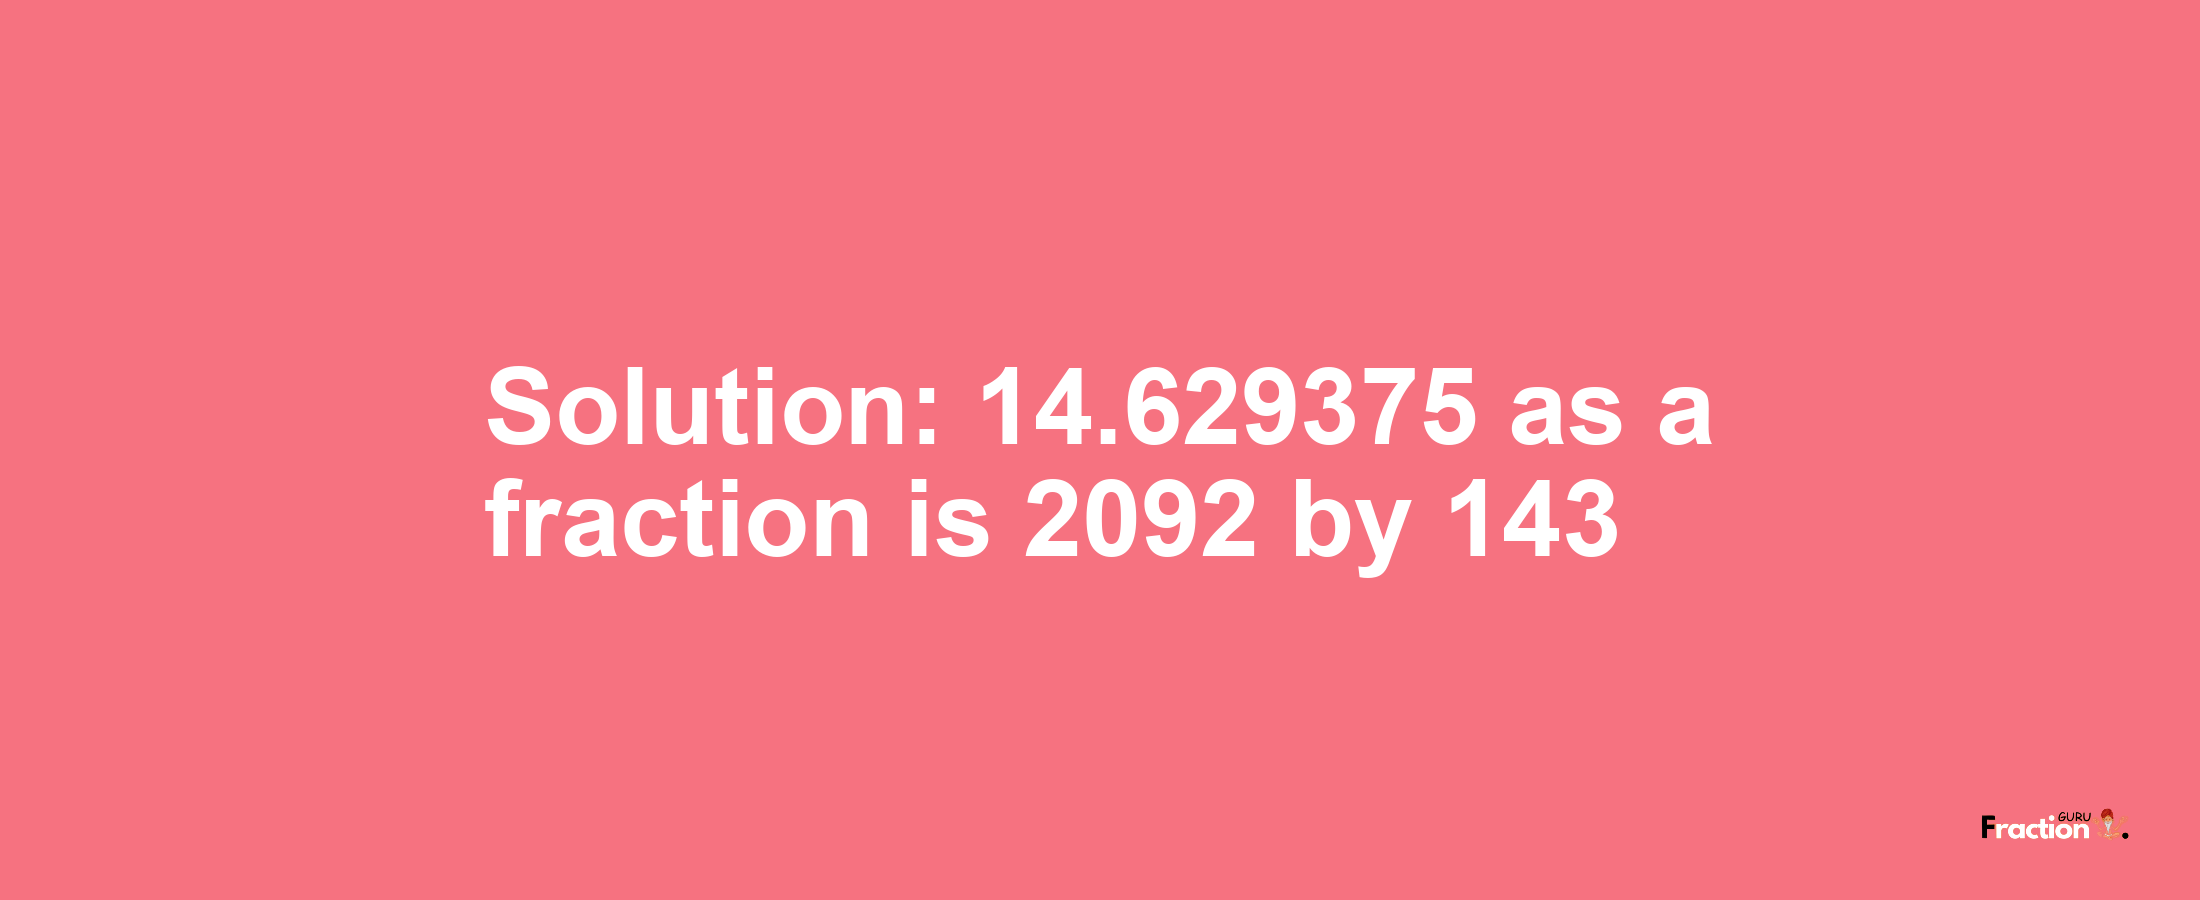 Solution:14.629375 as a fraction is 2092/143